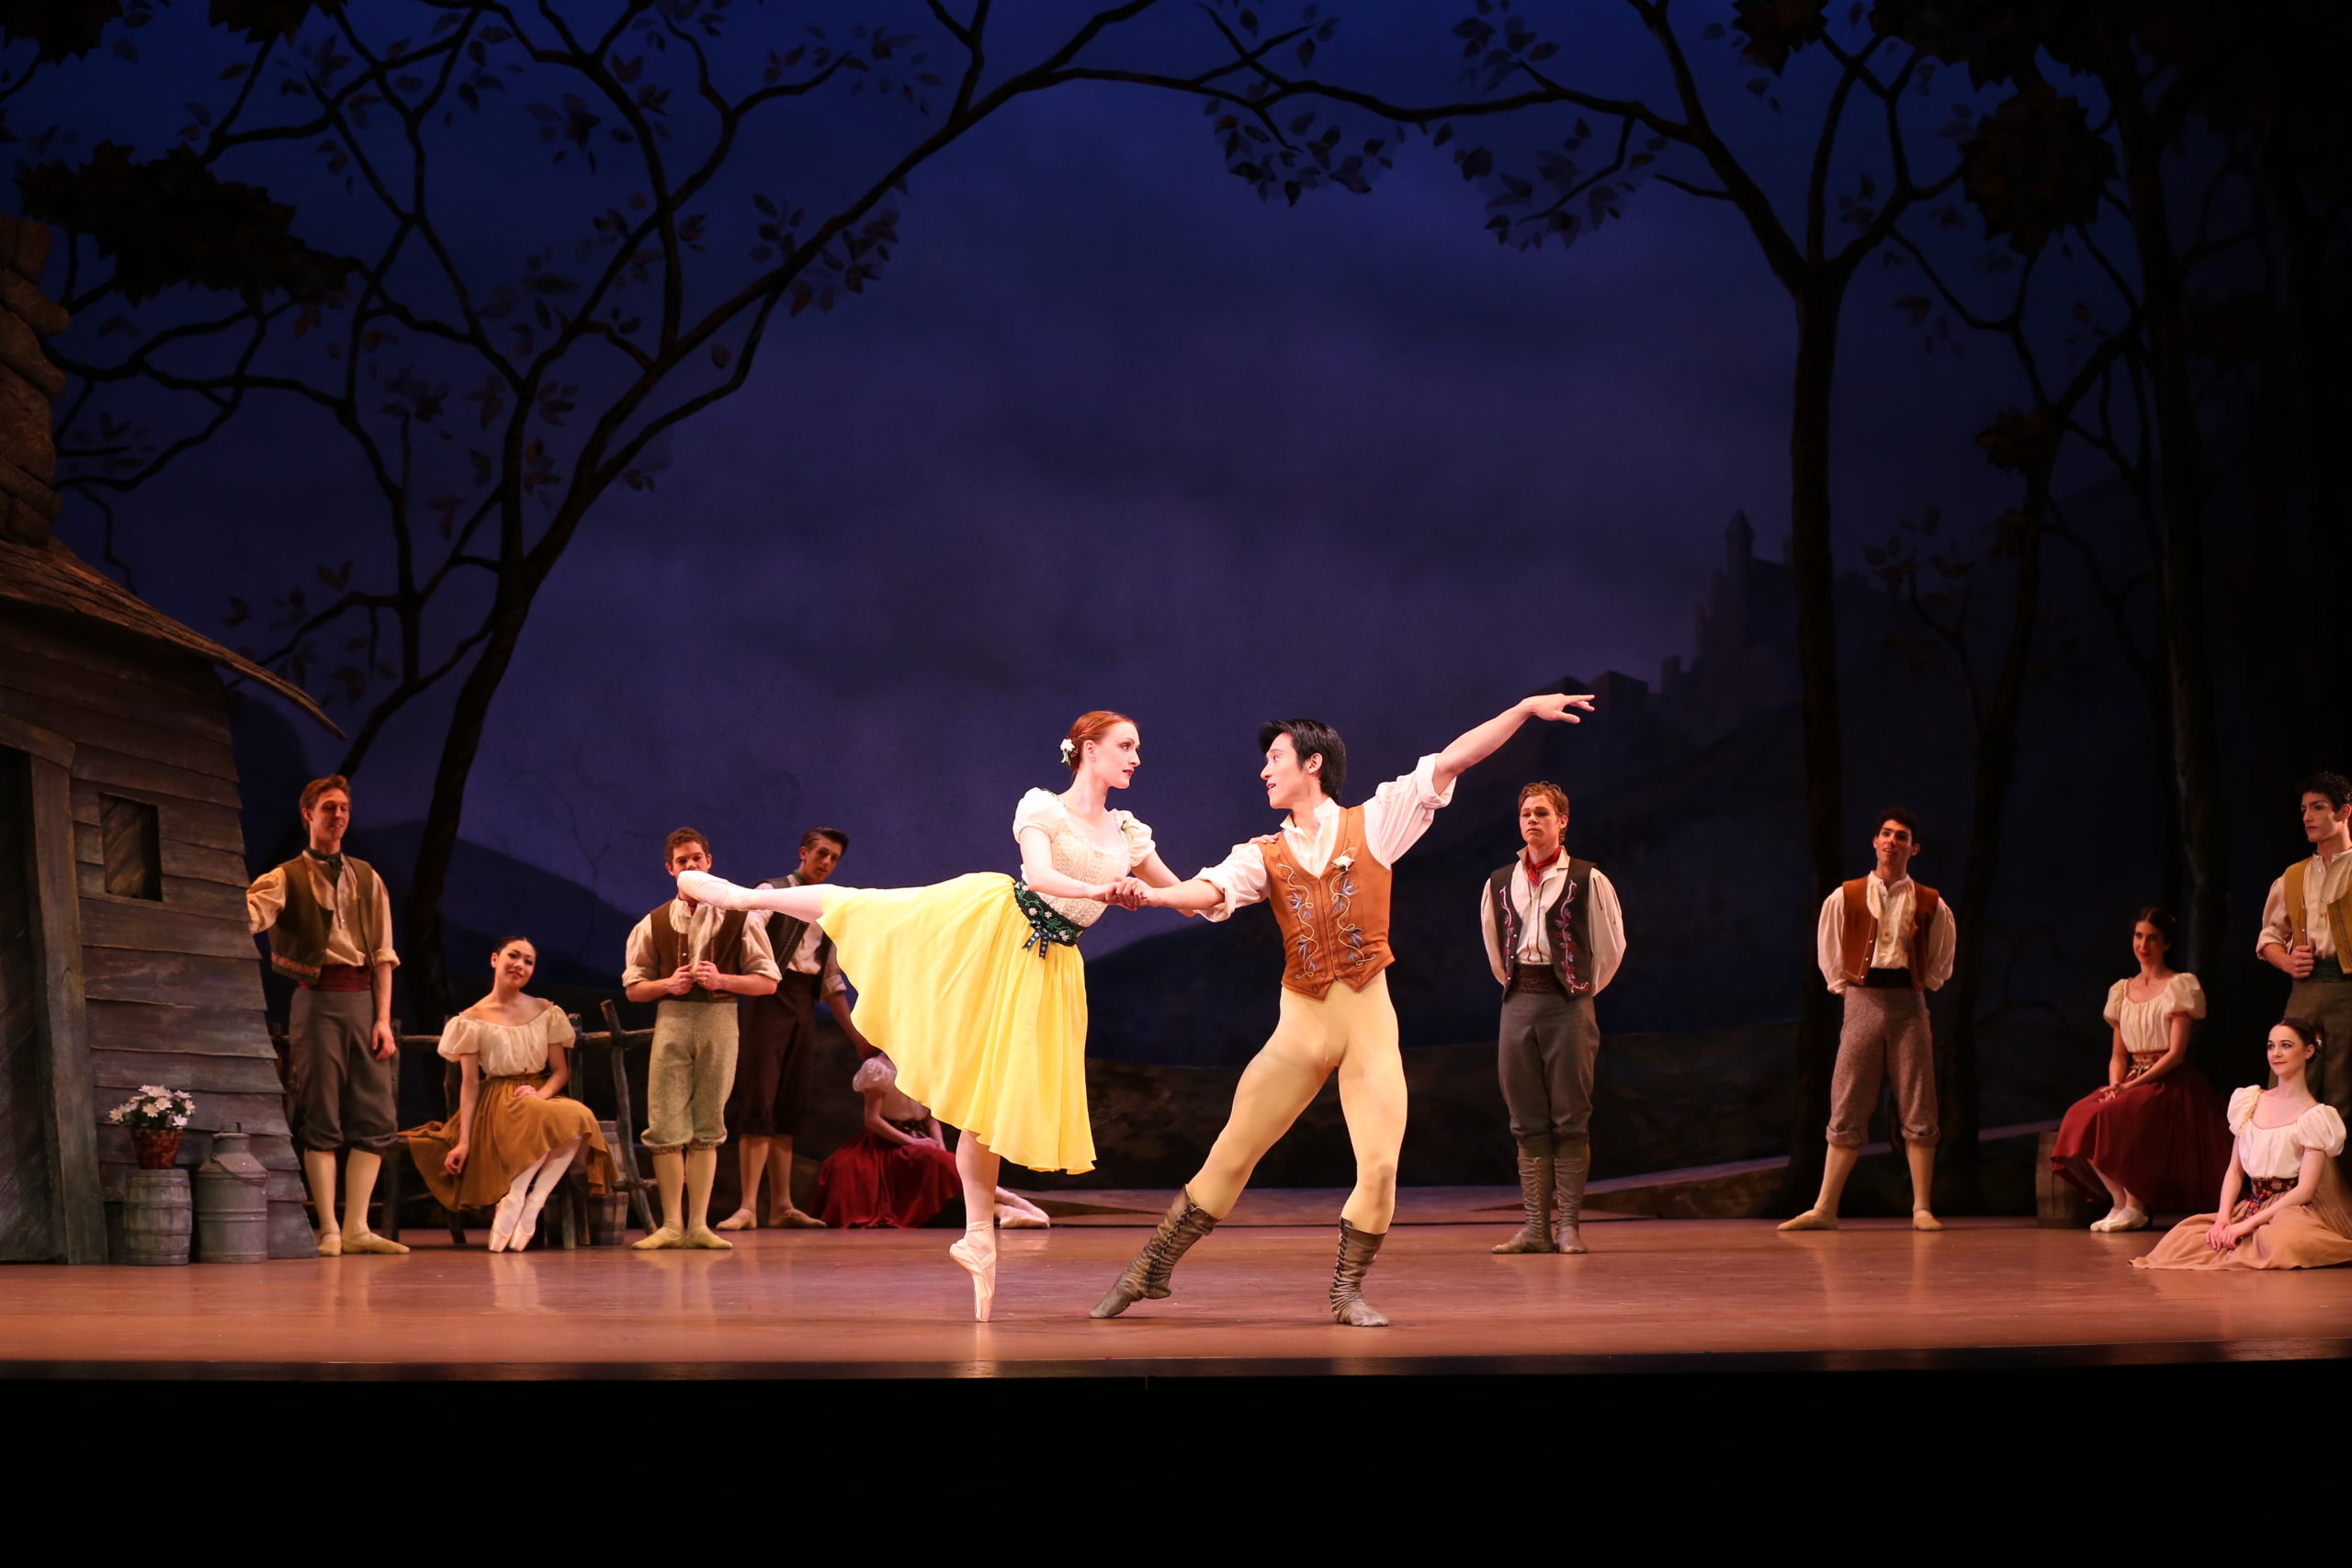 Giselle performance with two characters main stage.